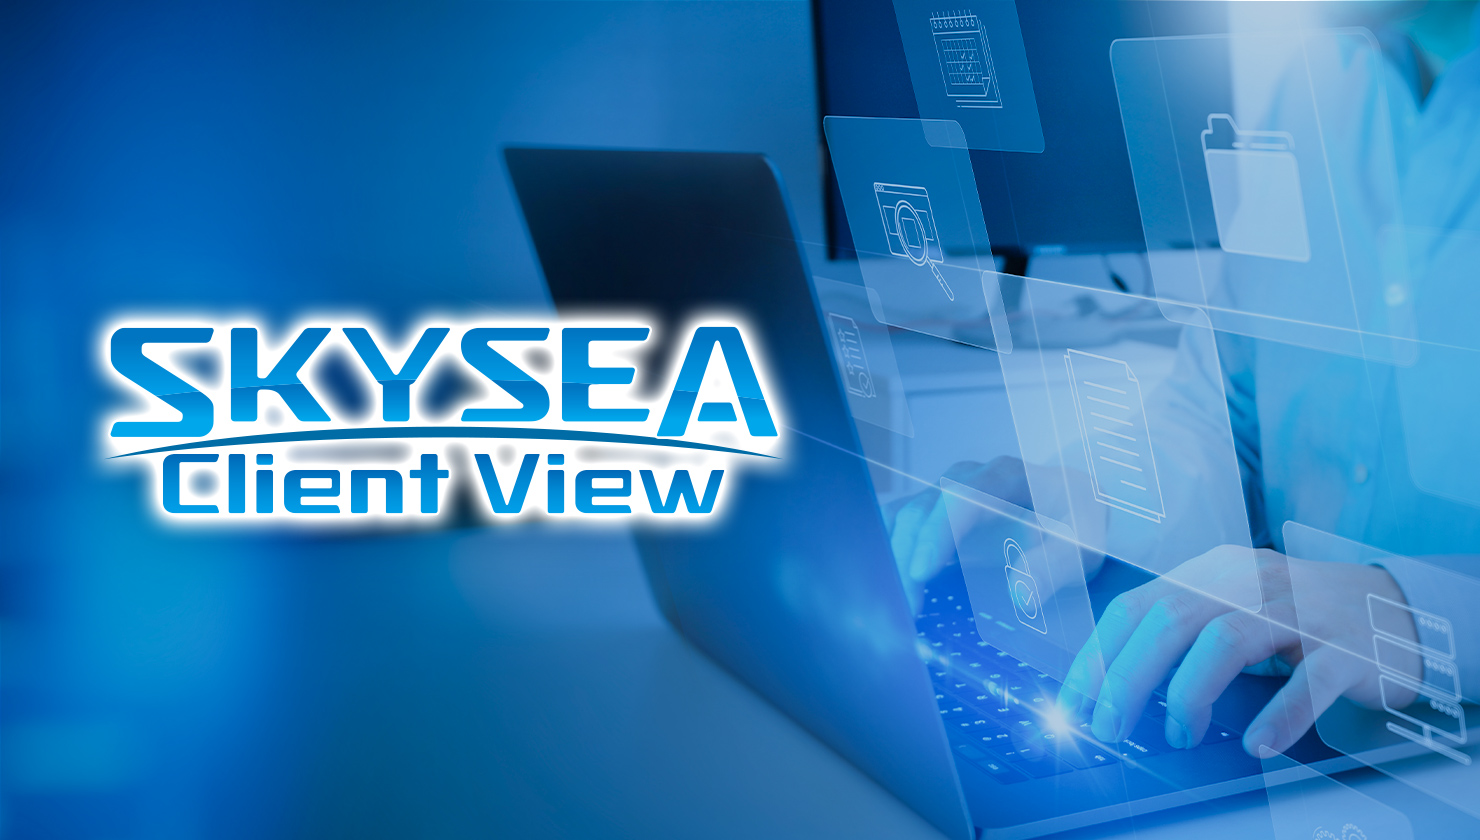 IT資産管理と「SKYSEA Client View」